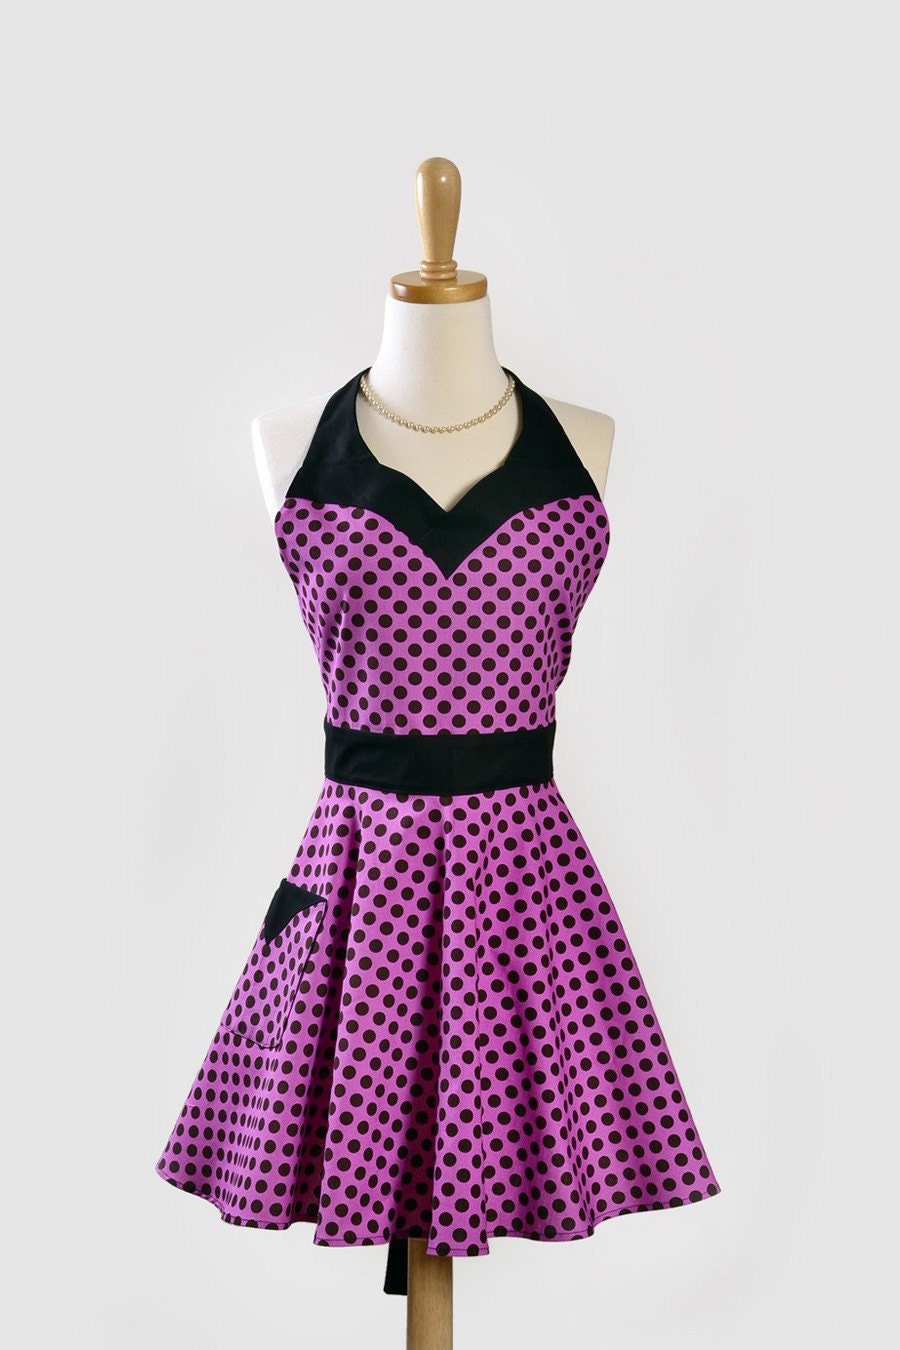 Womens Sweetheart Apron / Retro Styling in Black Dots on Pink from Michael Miller Ta Dots